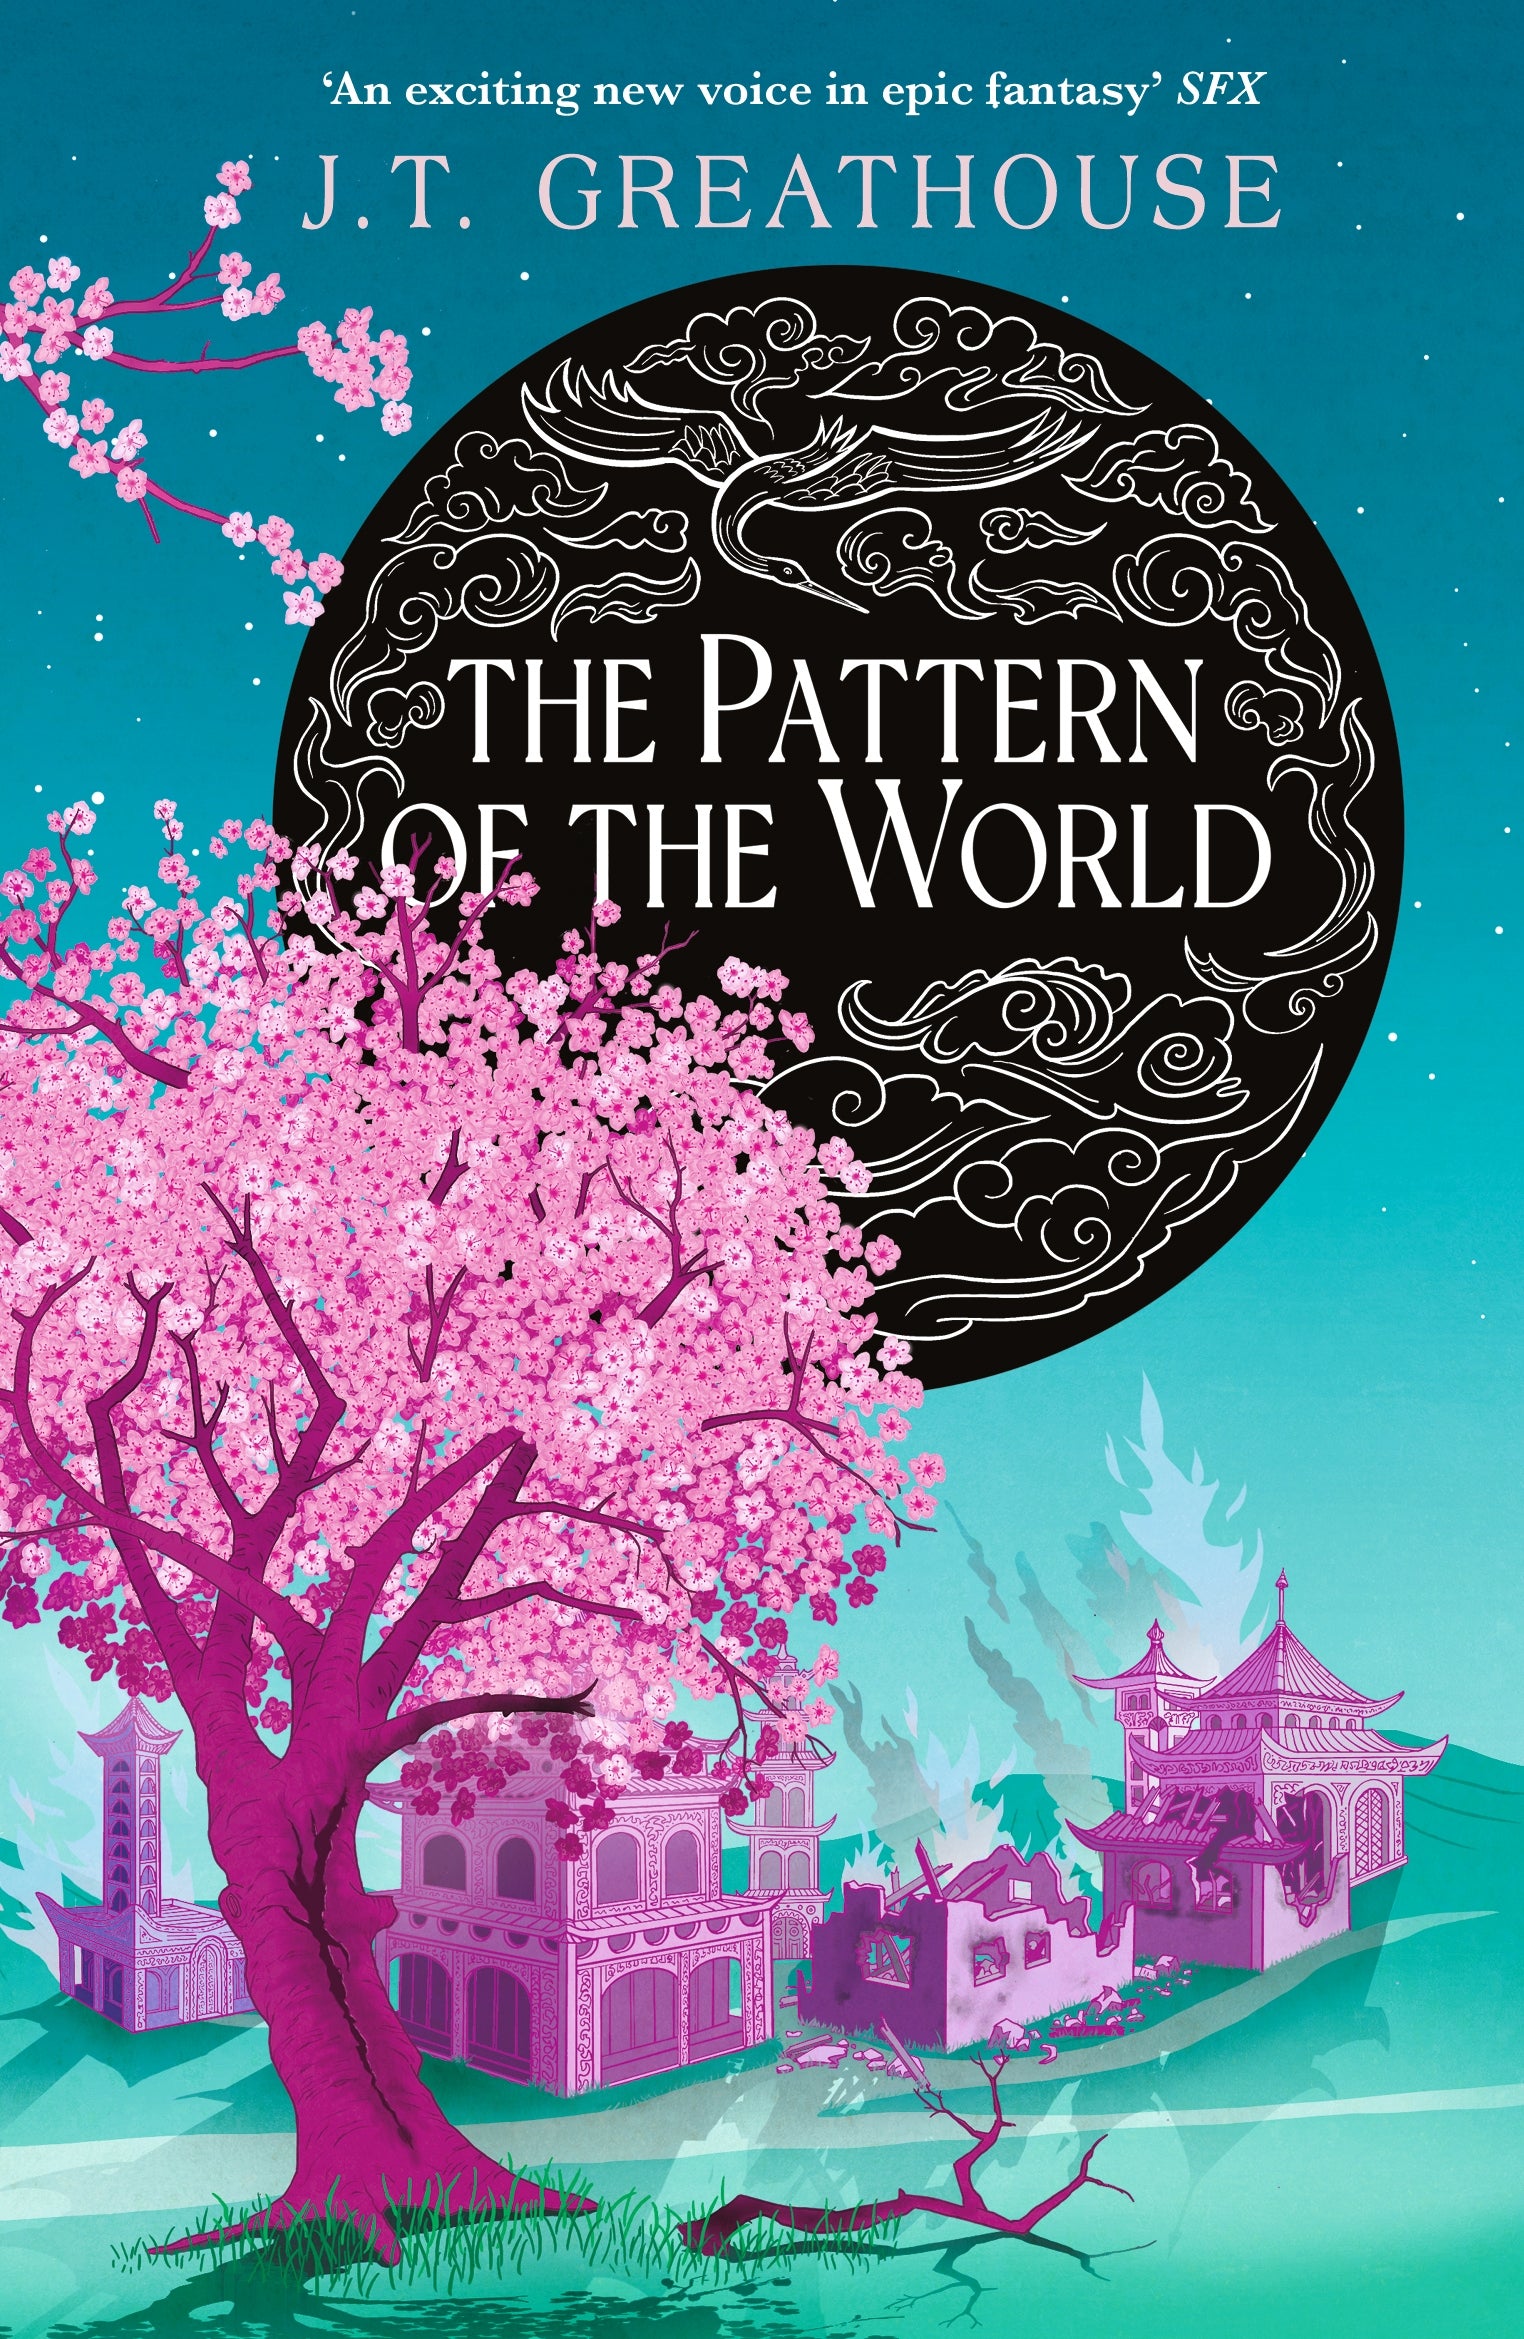 The Pattern of the World by J.T. Greathouse